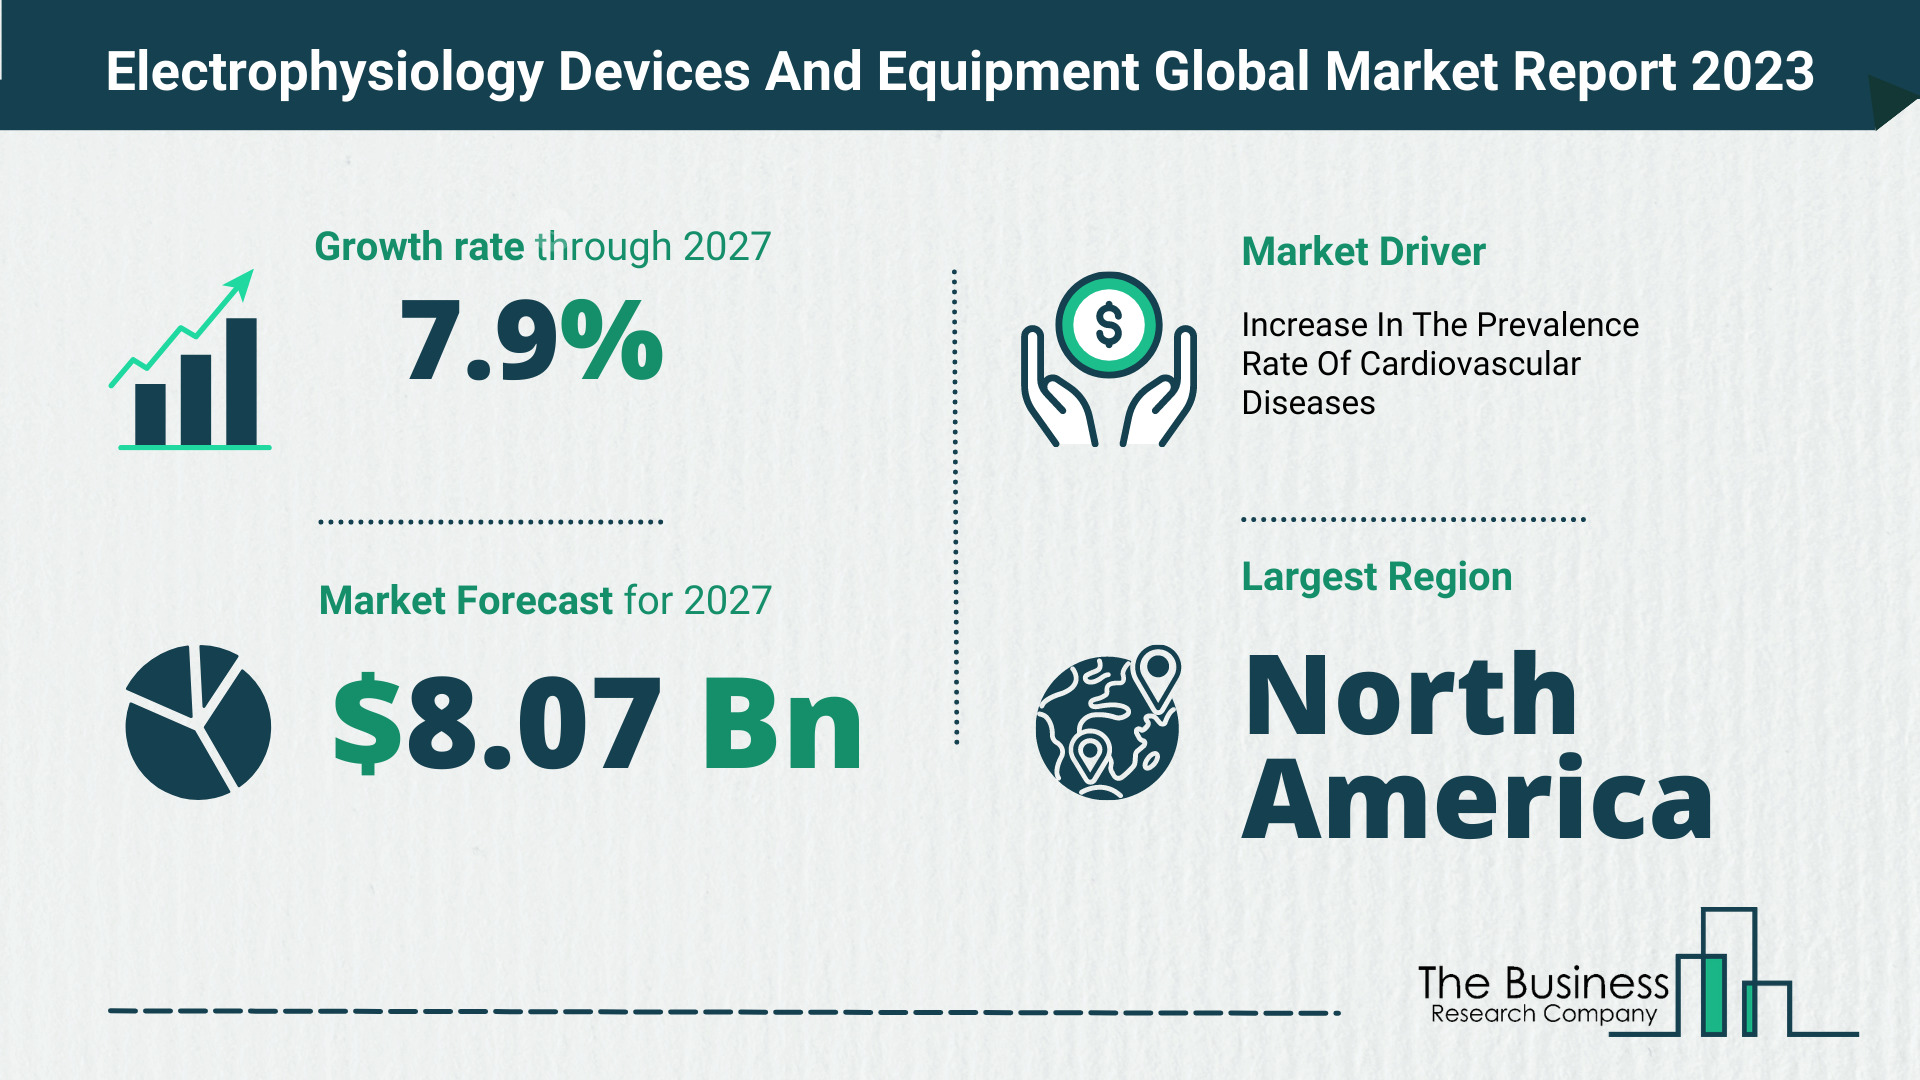 Global Electrophysiology Devices And Equipment Market